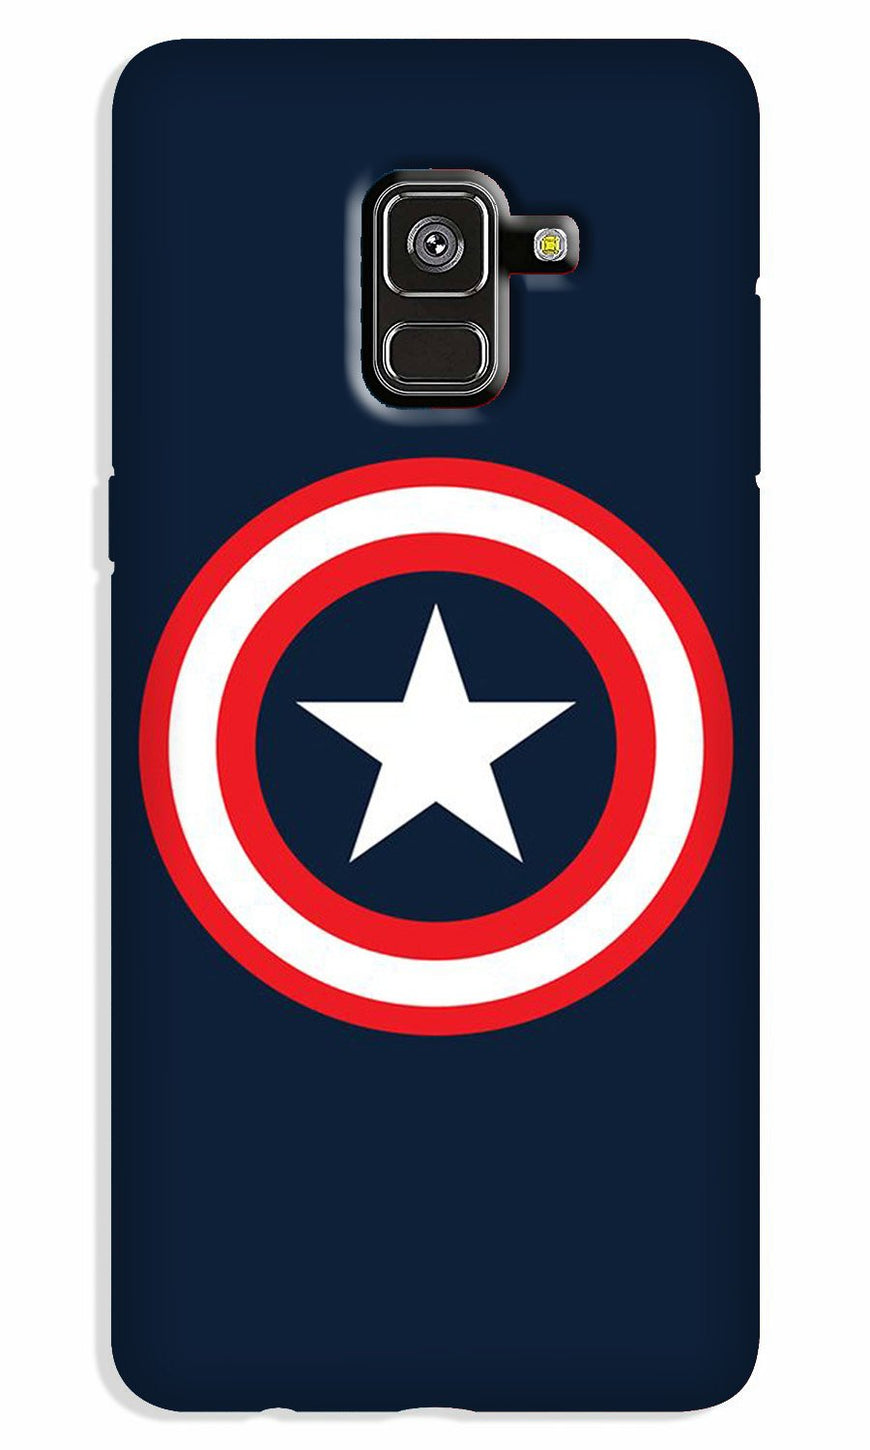 Captain America Case for Galaxy J6 / On6